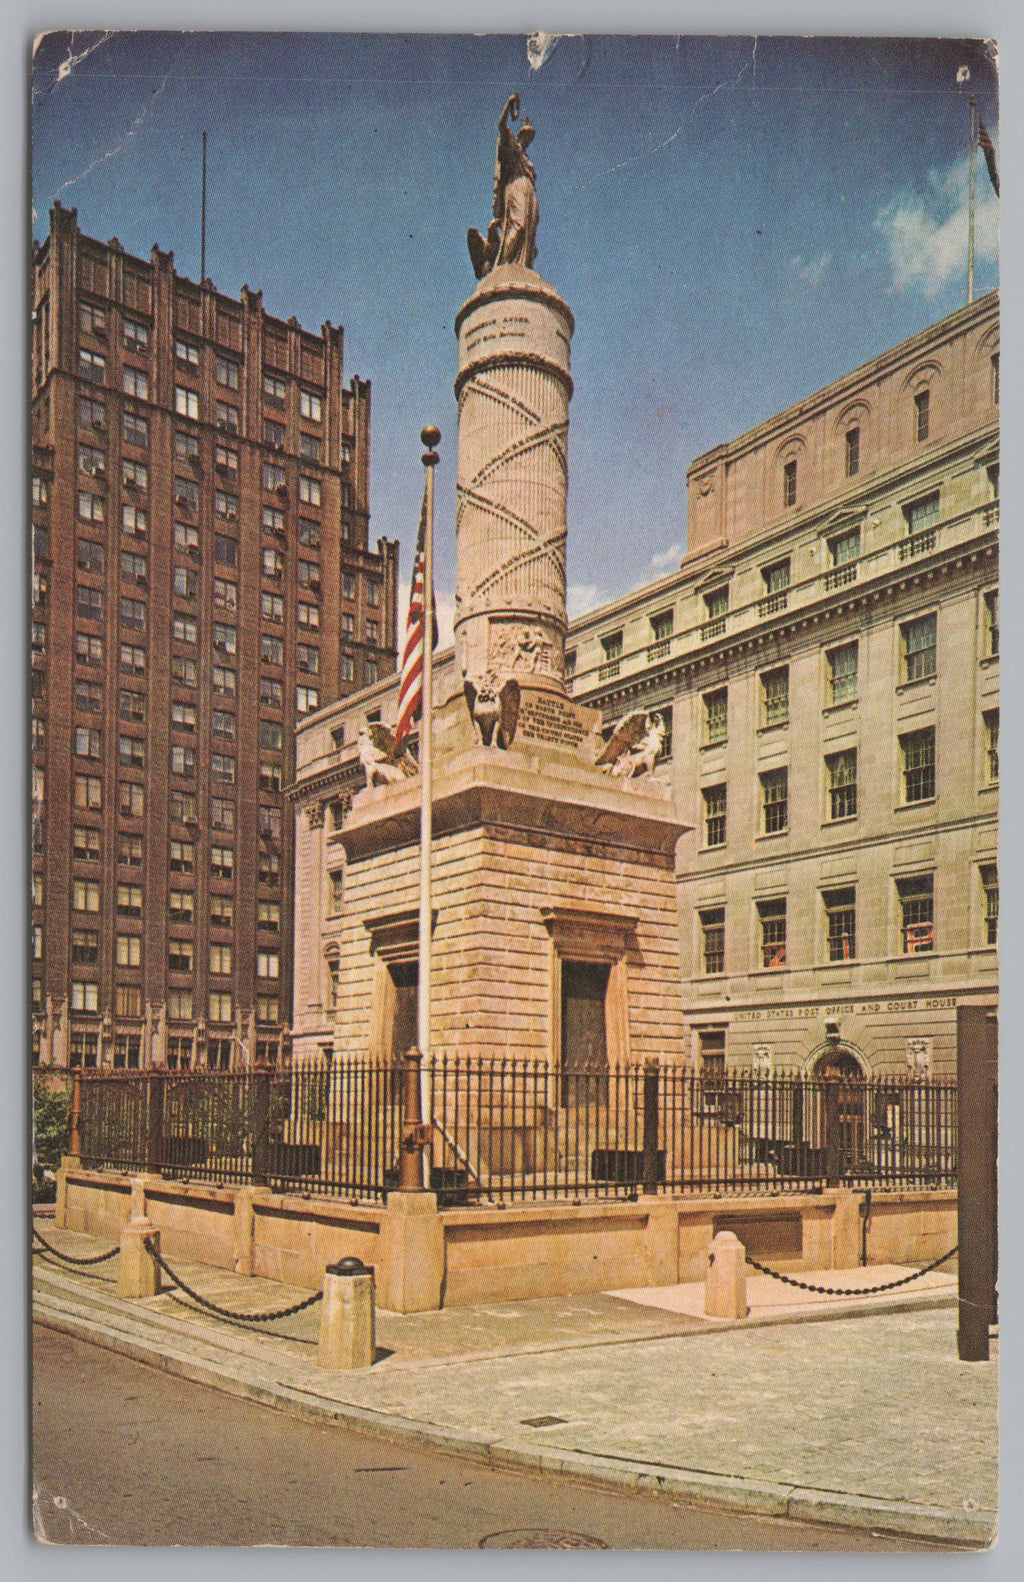 The Battle Monument, 1815-1825, Baltimore, Maryland, USA, Vintage Post Card.